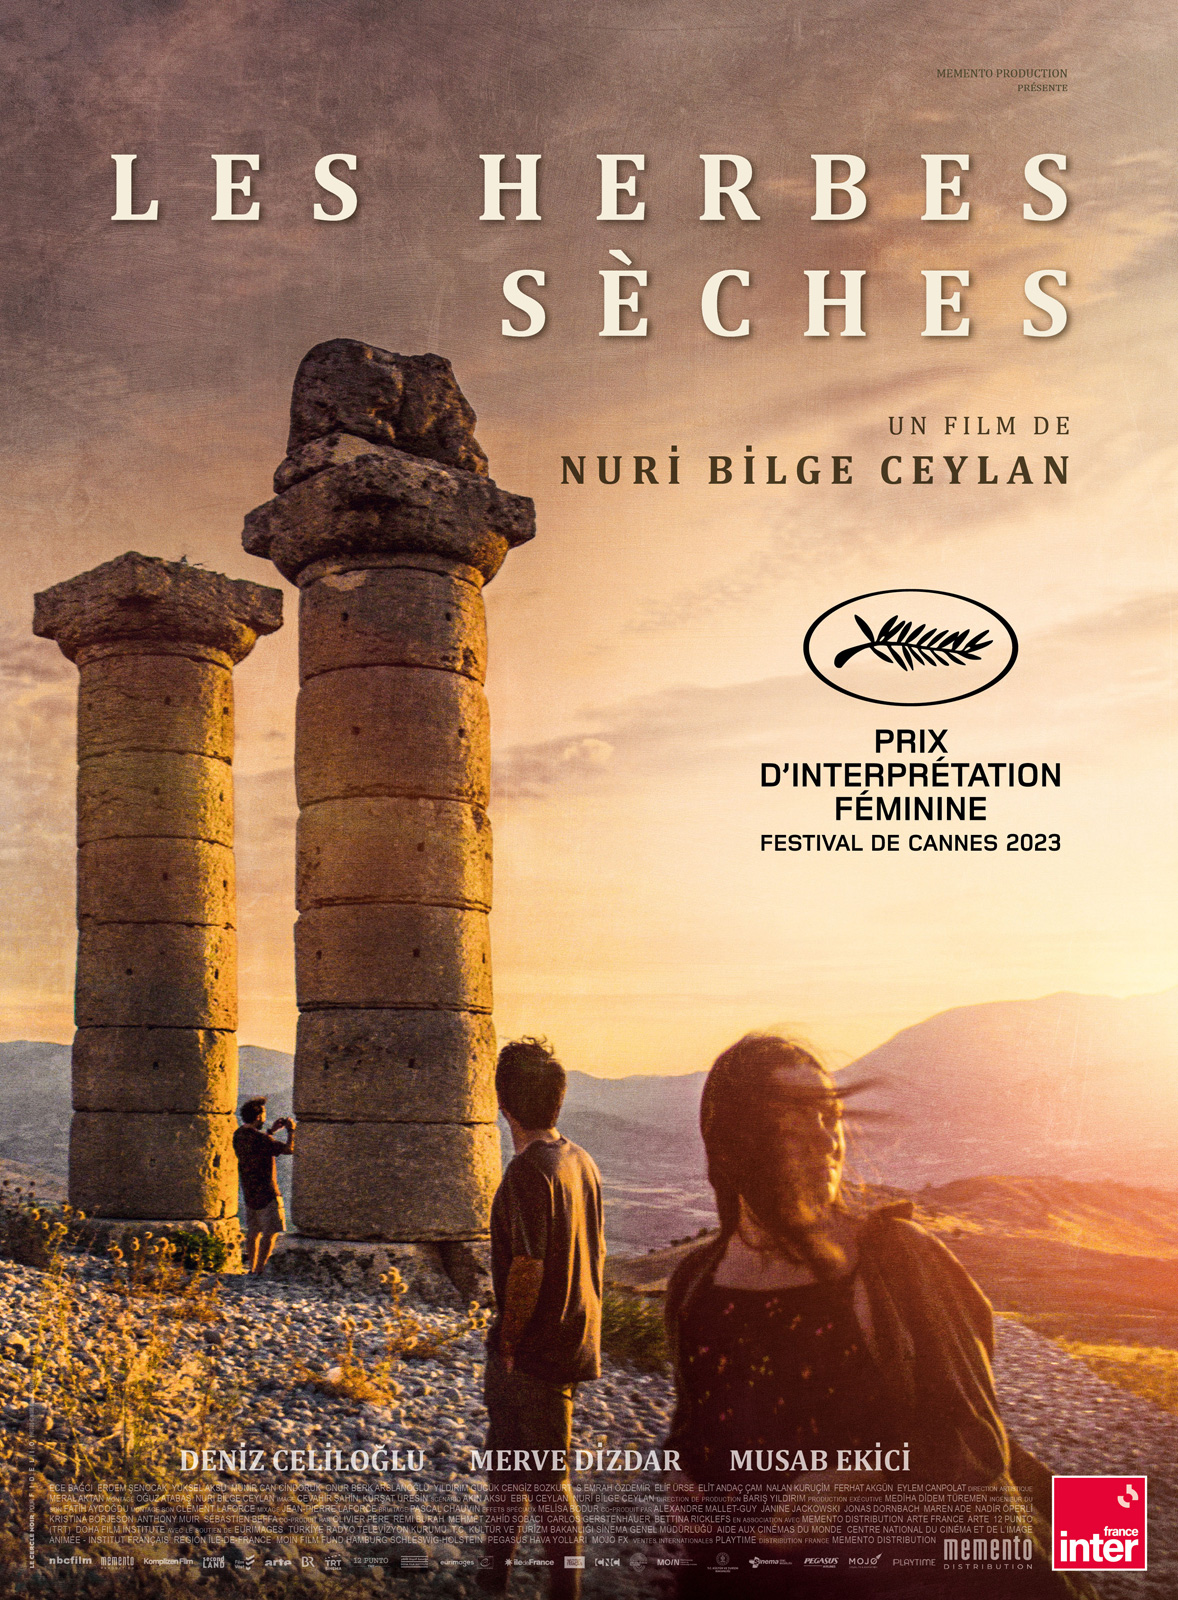 Les Herbes sèches - film 2023 streaming VF gratuit complet